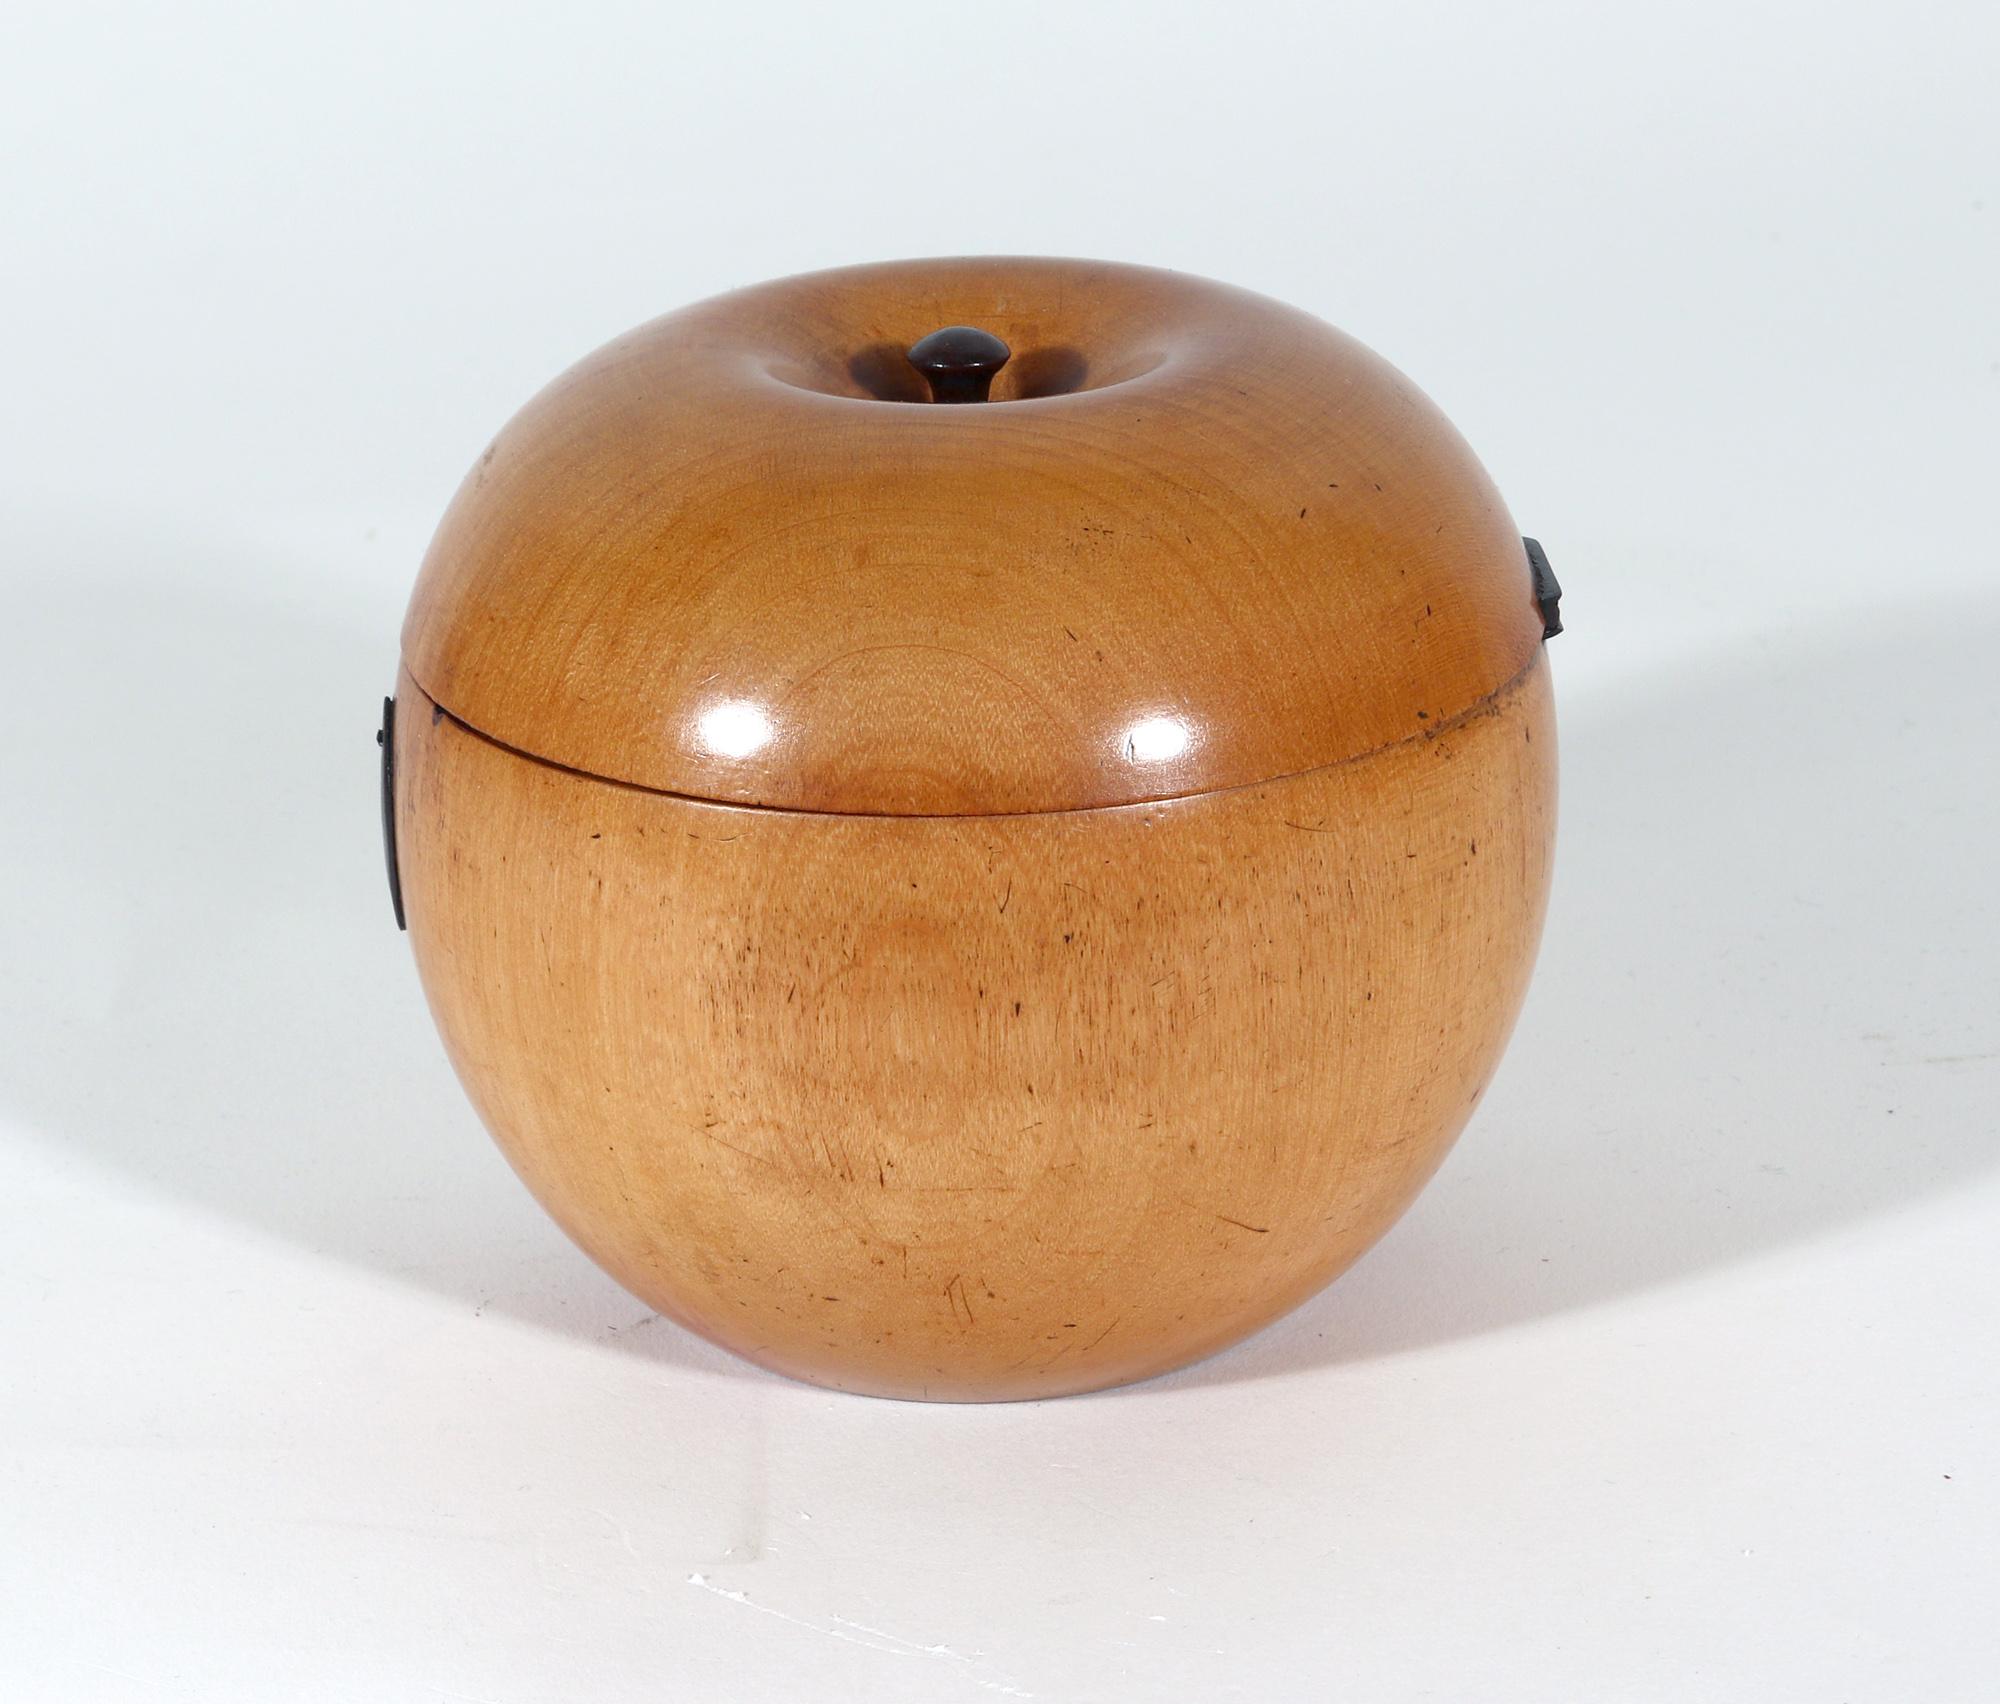 English antique fruitwood tea caddy,
Late 18th century

The antique fruitwood tea caddy is in the form of an apple with a carved stalk in the center of the cover. It was lathe-turned and is in two parts, hinged at the back. It is now with a